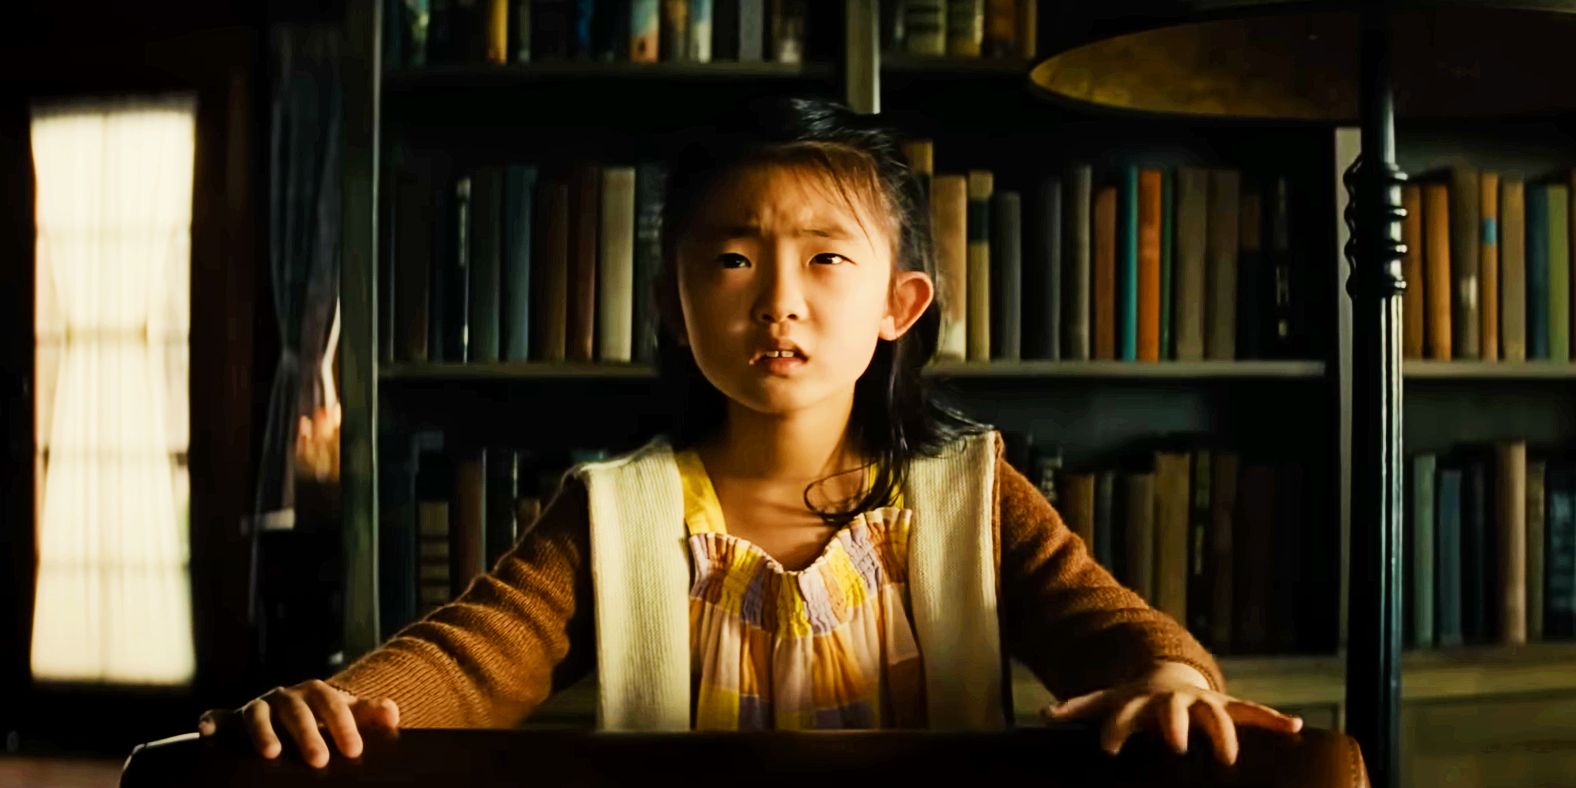 Kristen Cui as Wen looking scared in front of book shelf in Knock at the Cabin